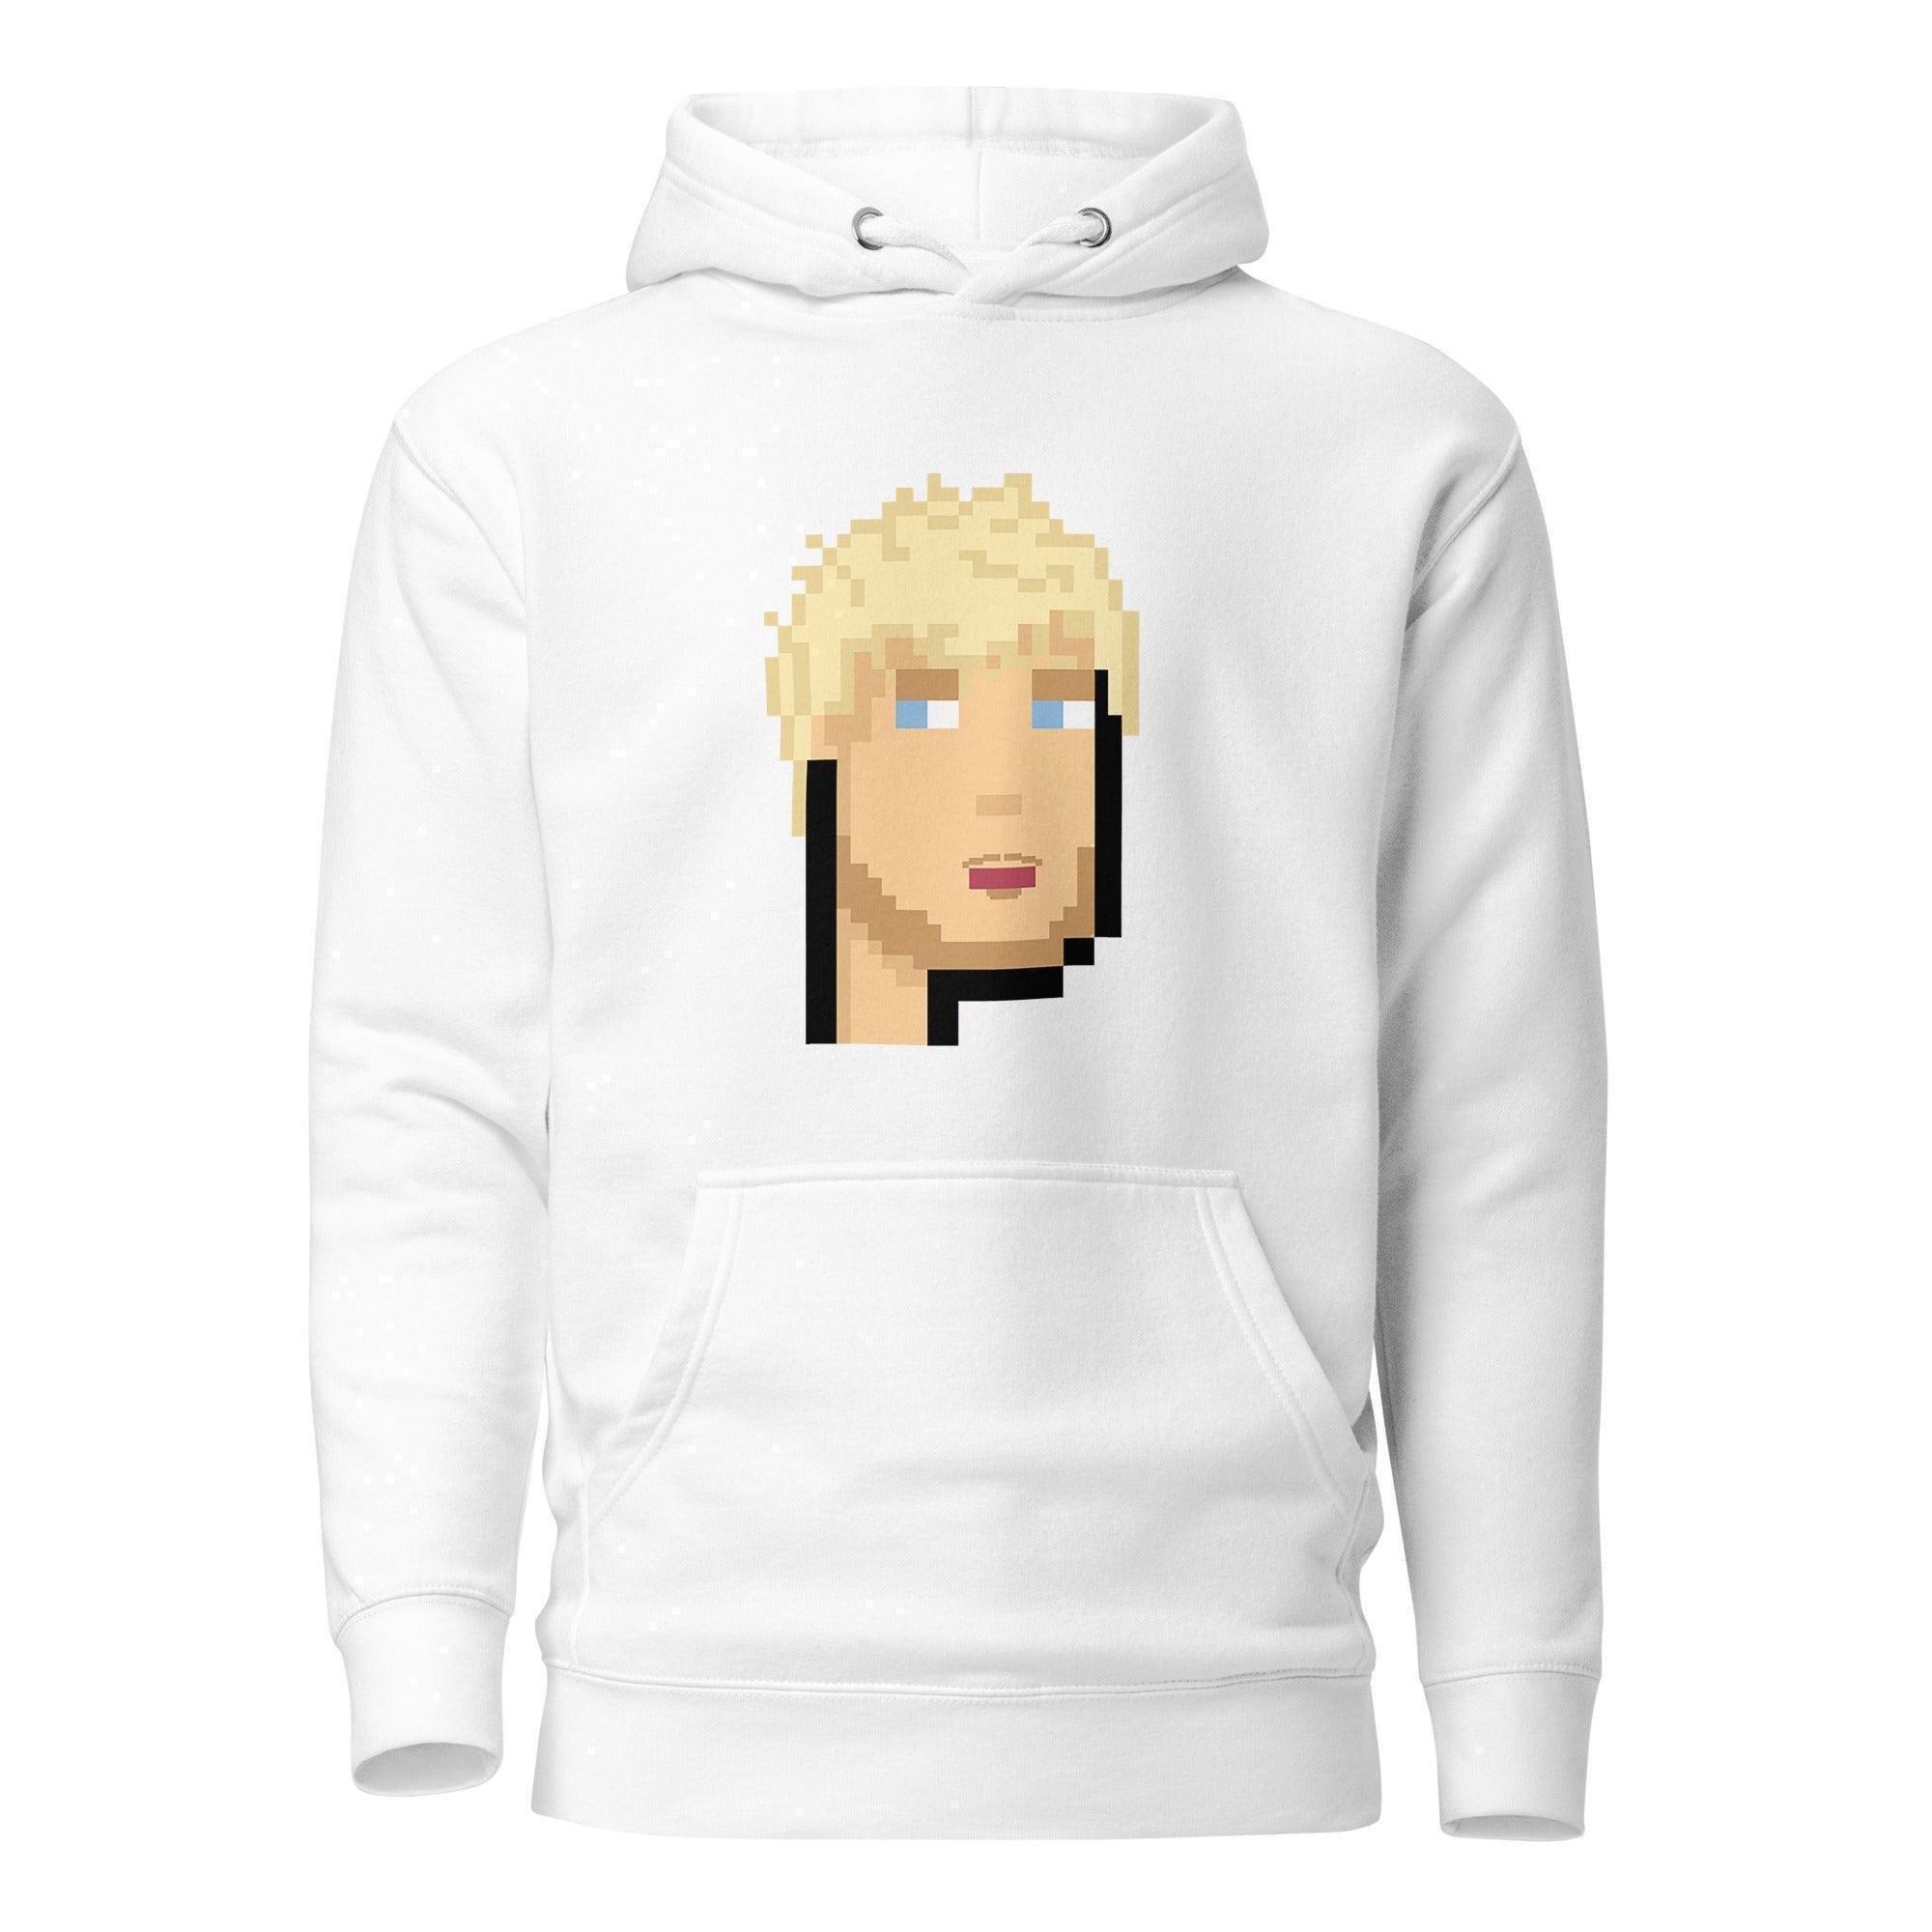 Celebrity Punk 17 Pullover Hoodie - InvestmenTees